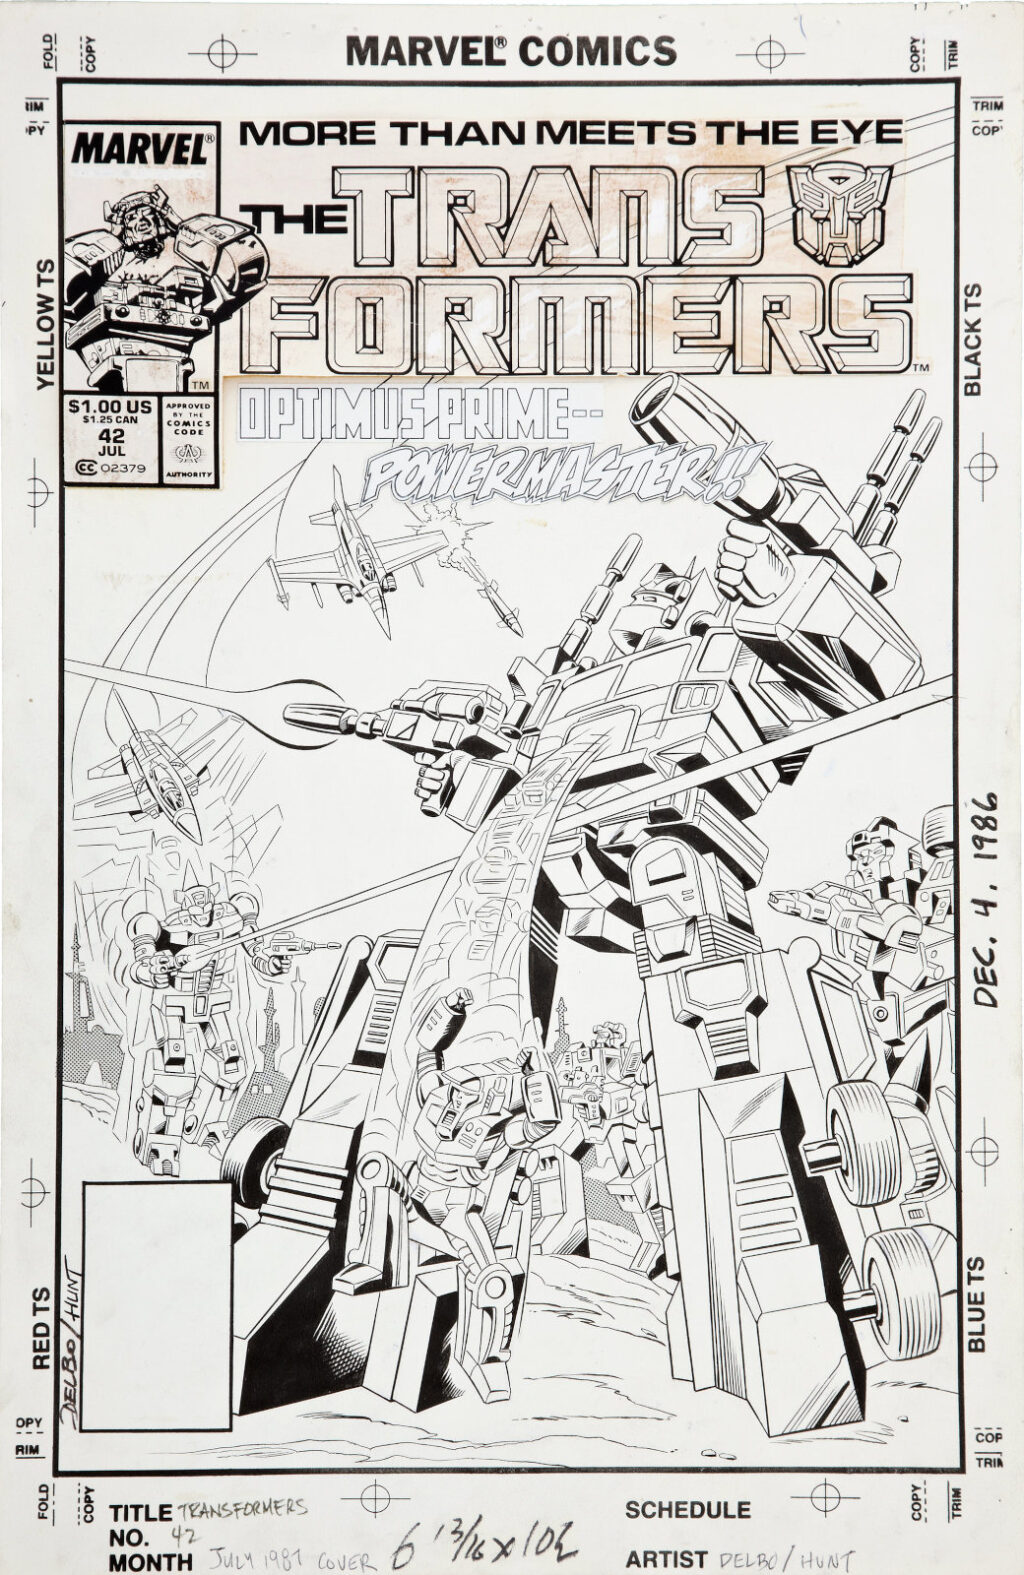 Transformers issue 42 cover by Jose Delbo and Dave Hunt